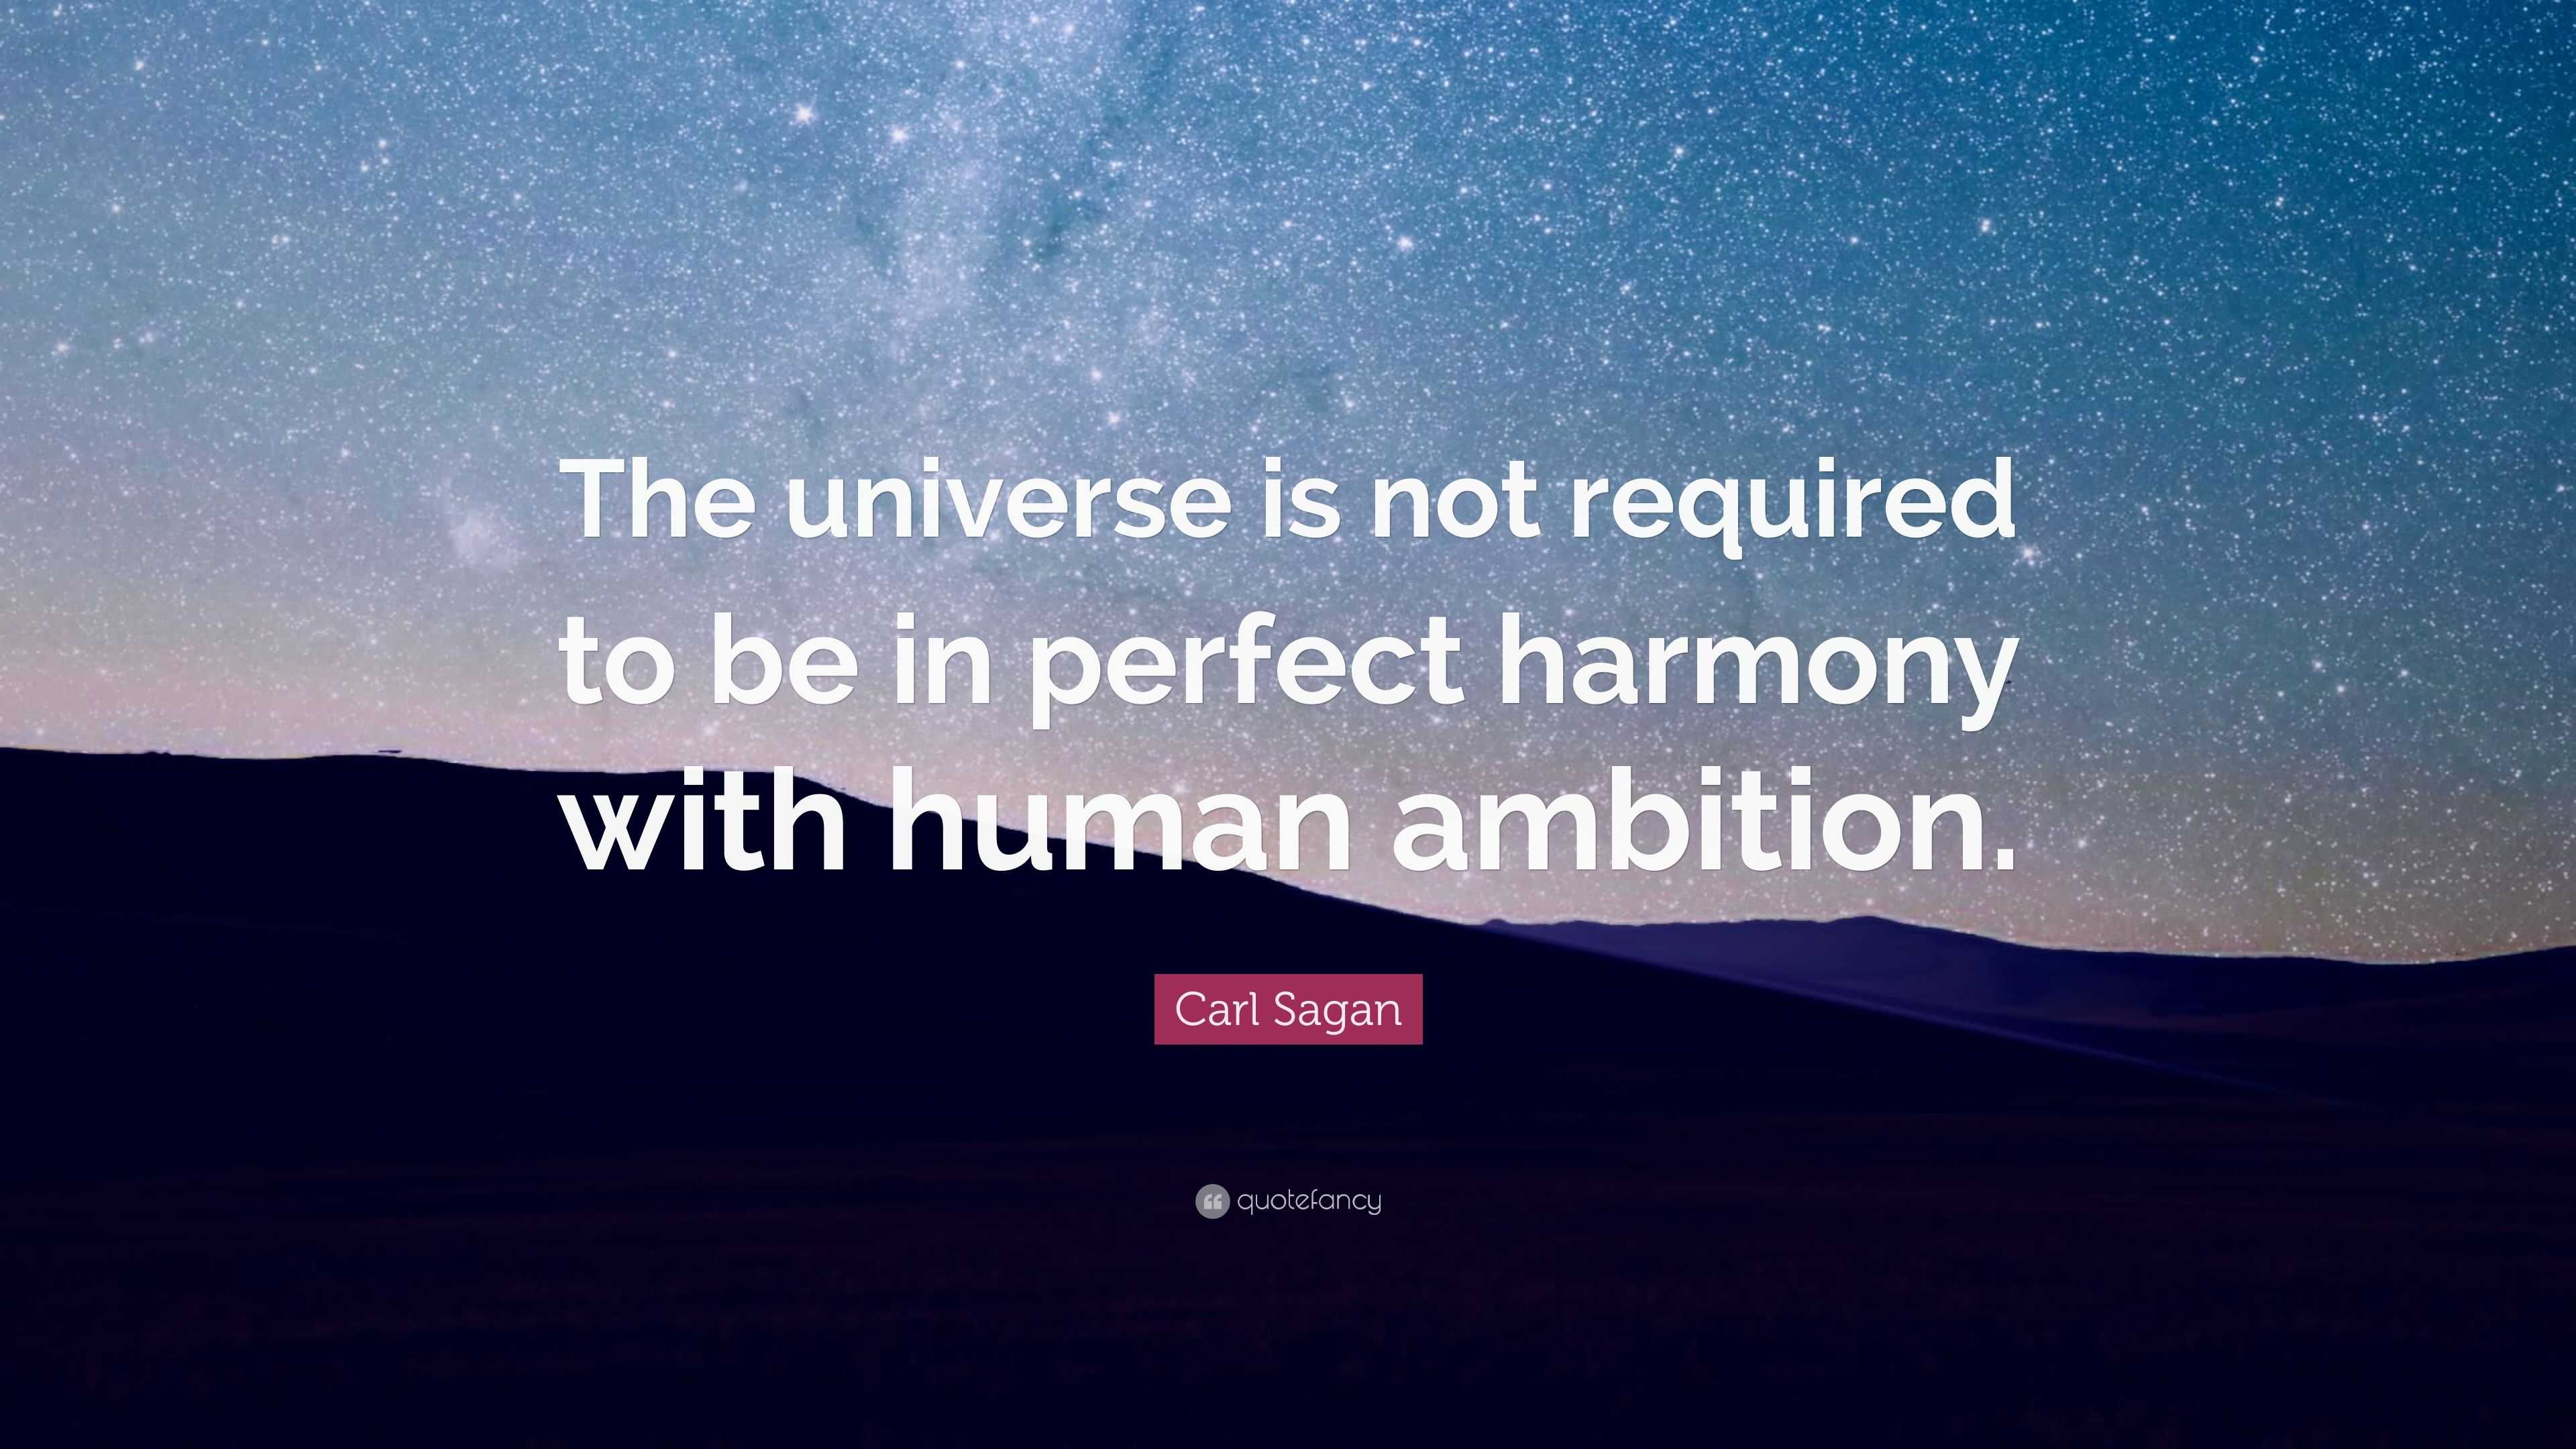 Carl Sagan Quote: “The universe is not required to be in perfect ...